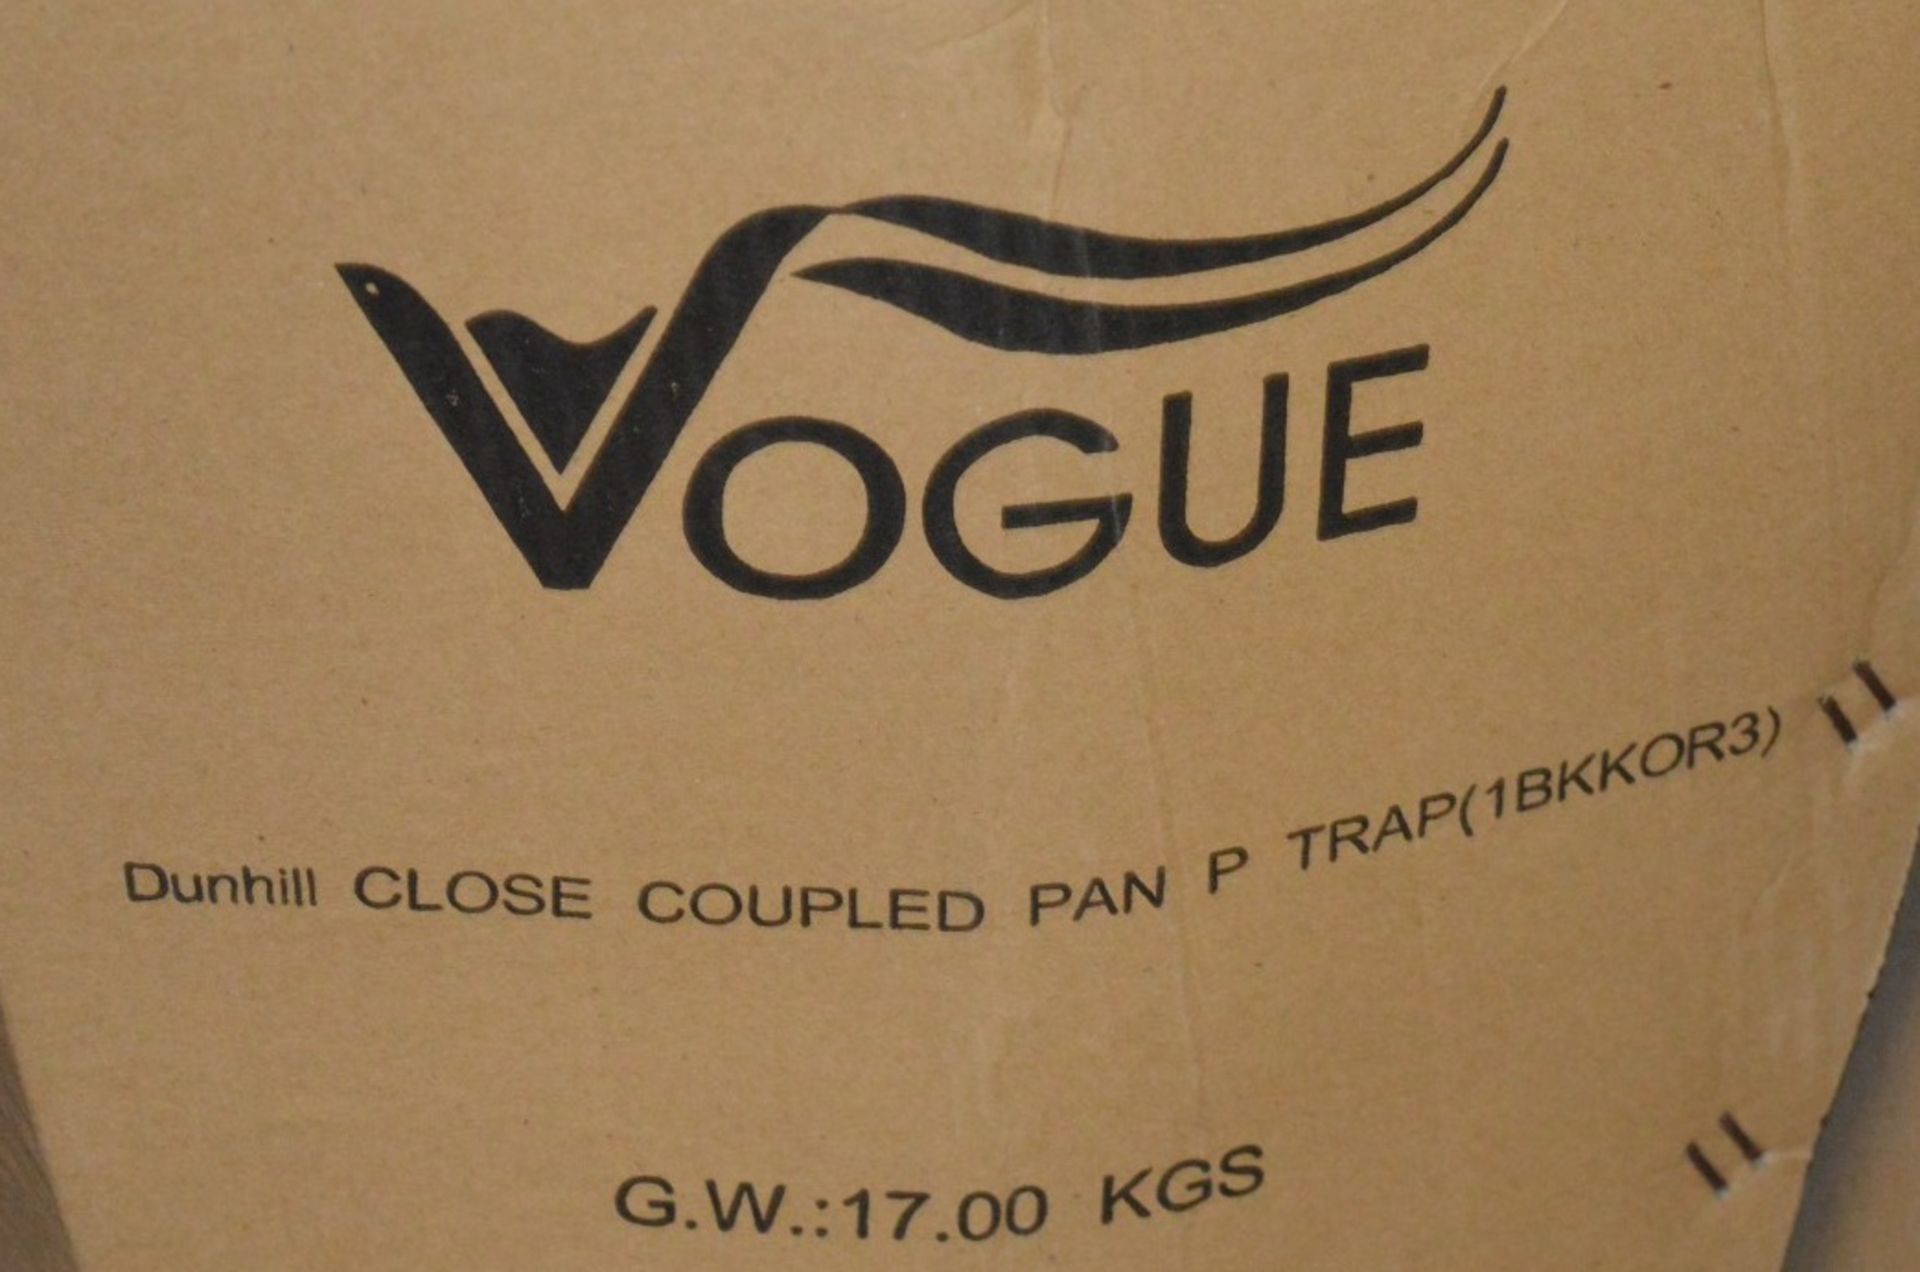 1 x Vogue Bathrooms DUNHILL Close Coupled Toilet Pan - P Trap - Brand New and Boxed - Seat Not - Image 3 of 3